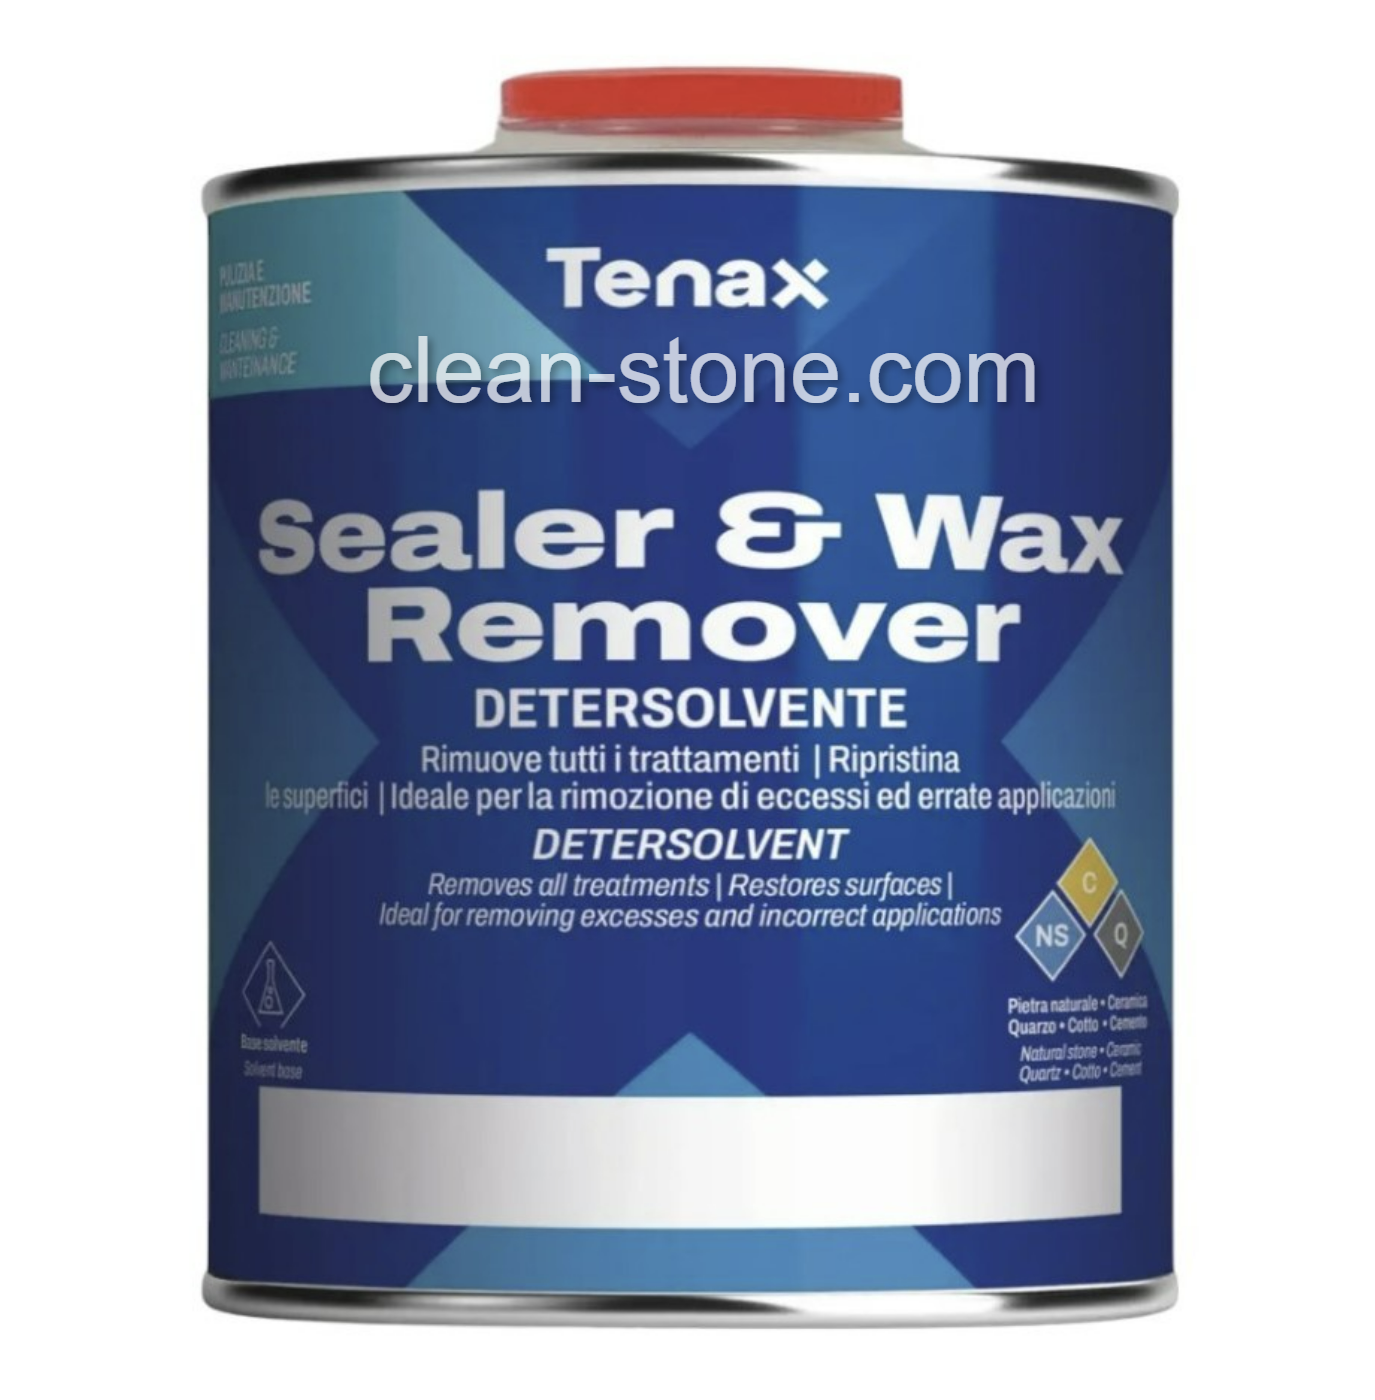 Sealer & Wax Remover (Ager Remover, Wax Remover) 1л Tenax